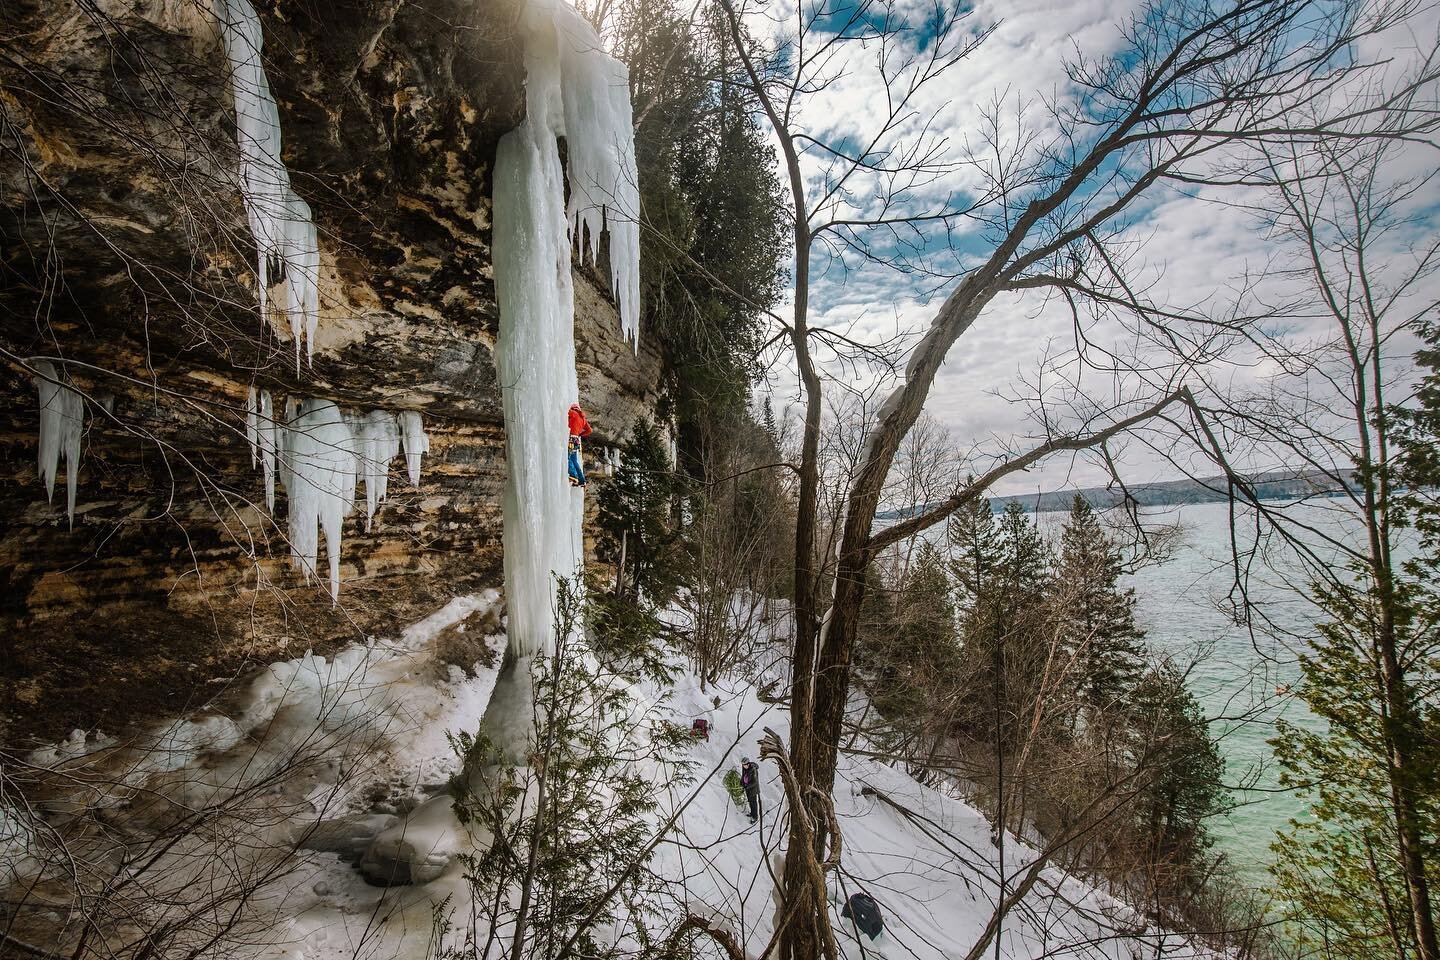 Watching @shu2260 pull that roof was incredible and terrifying!!! So much fun #iceclimbingphotography #adventurephotography